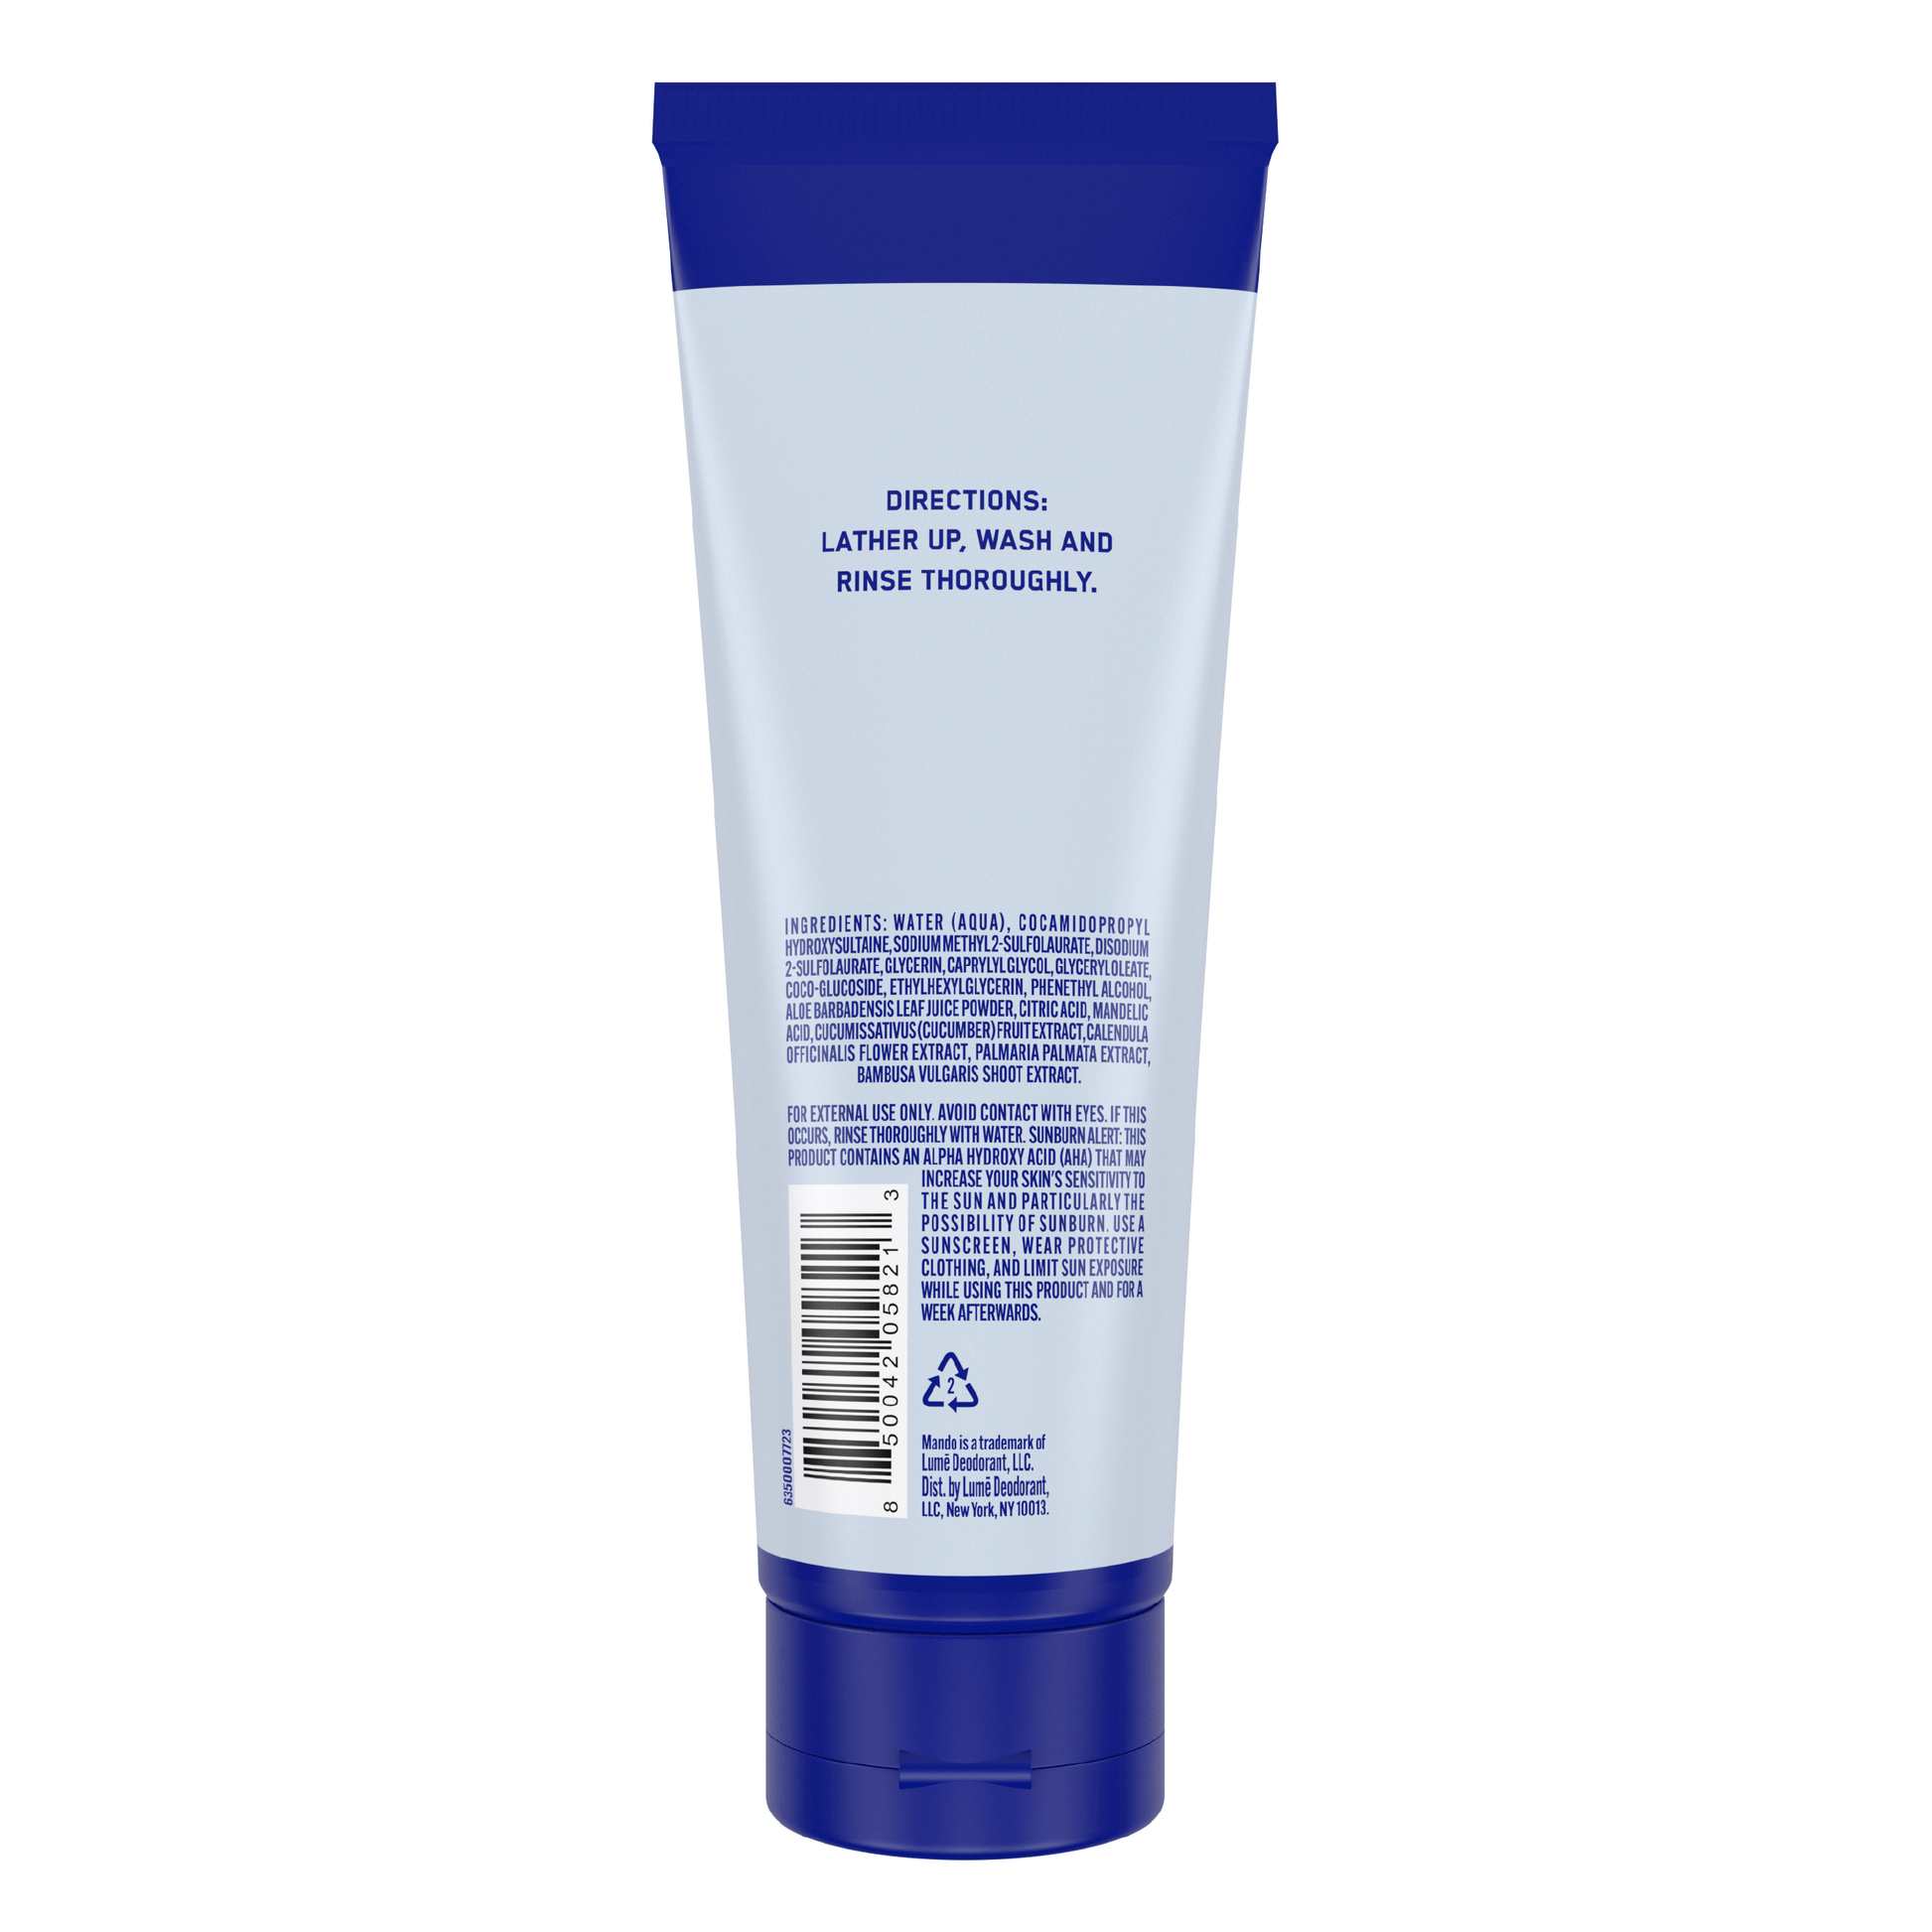 blue tube of Mando body wash in pro sport scent with directions text